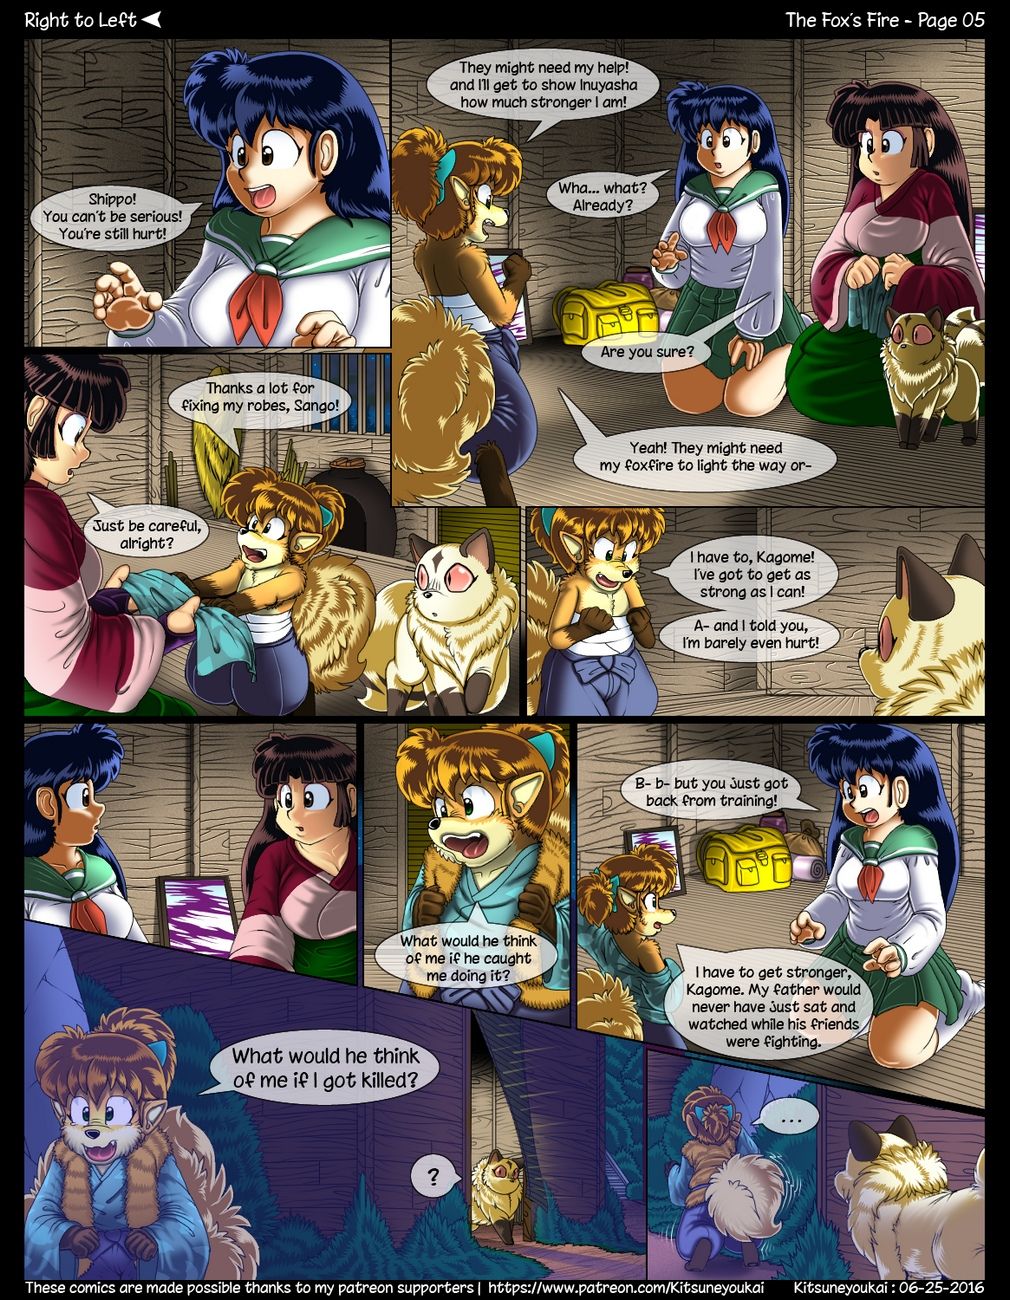 The Fox's Inner Fire (Furry) page 6